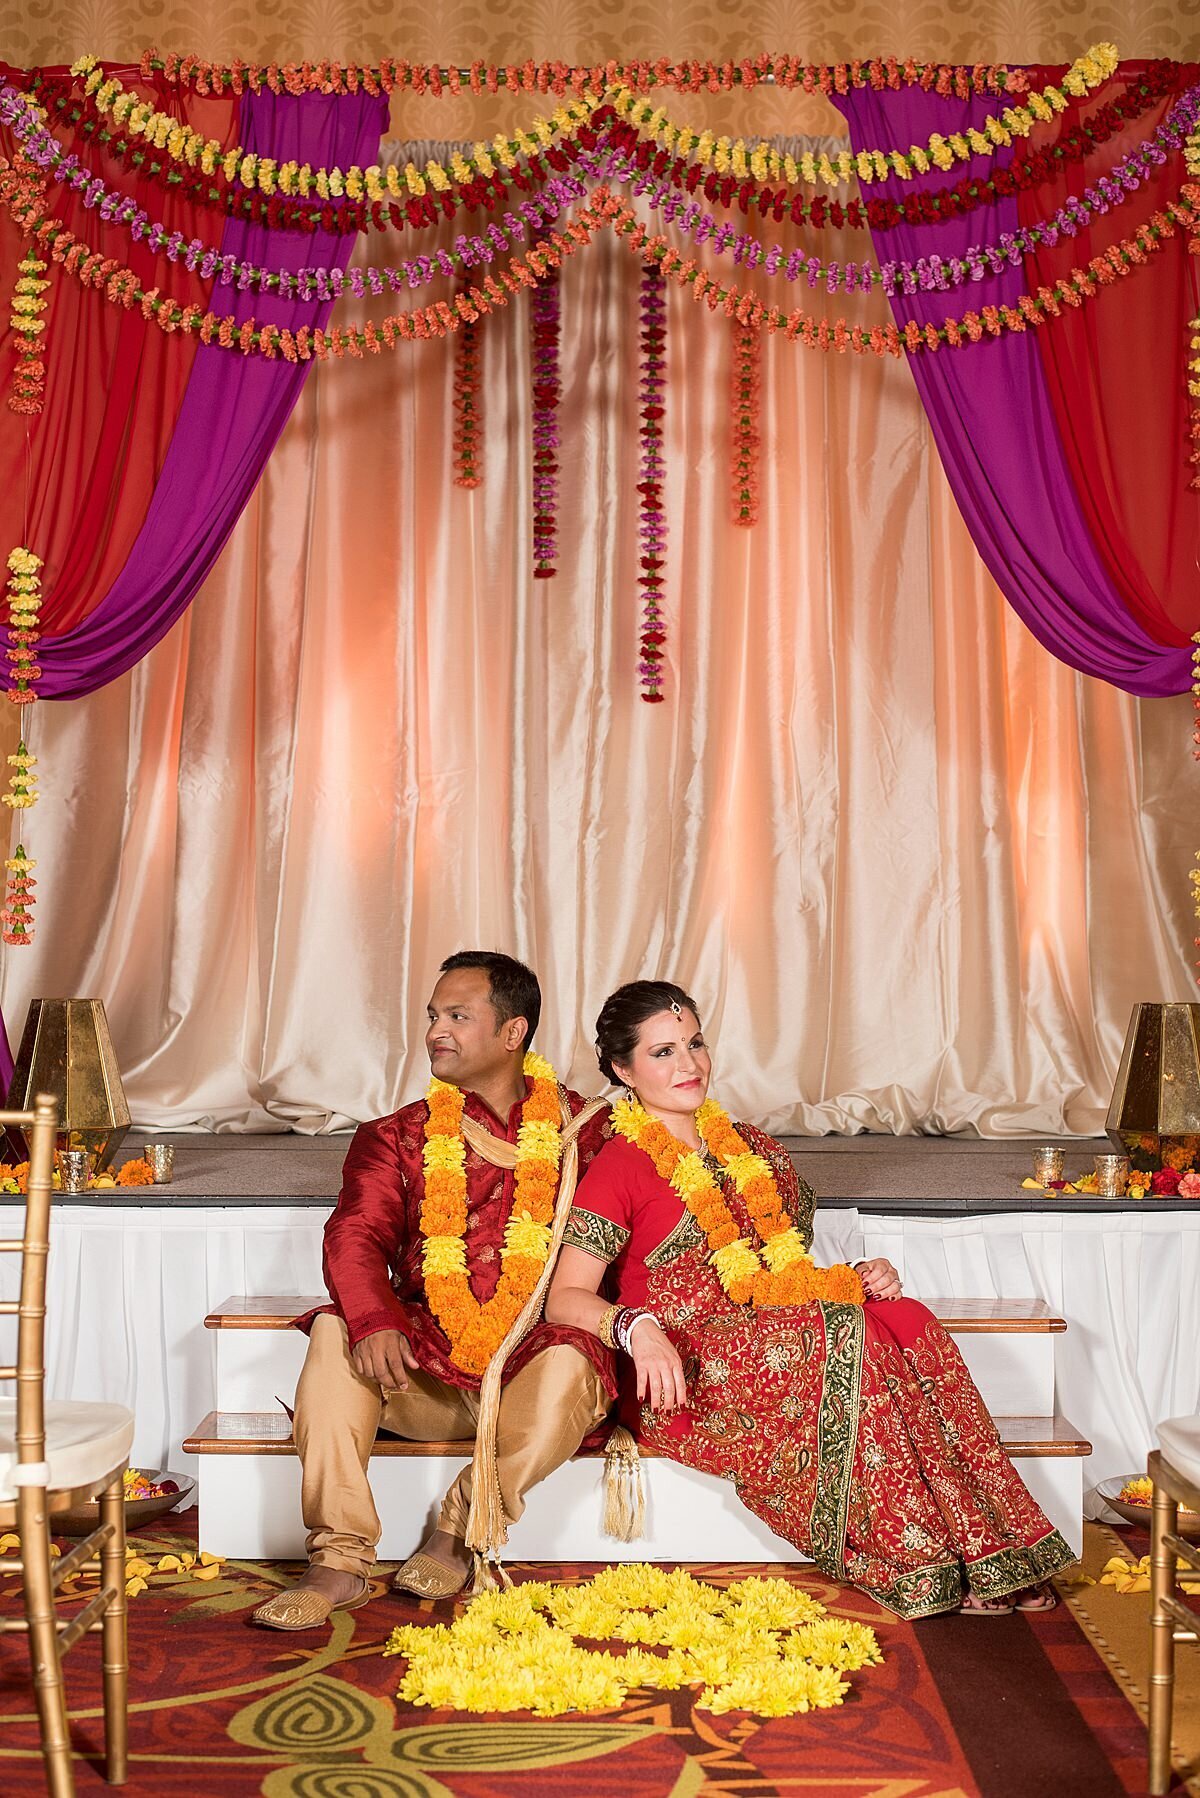 Hindu groom and bride at an Indian wedding in Nashville sitting on the steps of the peach, magenta and red mandap. The bride is wearing a red, green and gold saree and the groom is wearing a gold and red sherwani. The Indian Bride and groom are wearing orange and yellow varmalas with yellow flower petals on the red carpet at Embassy Suites, Nashville